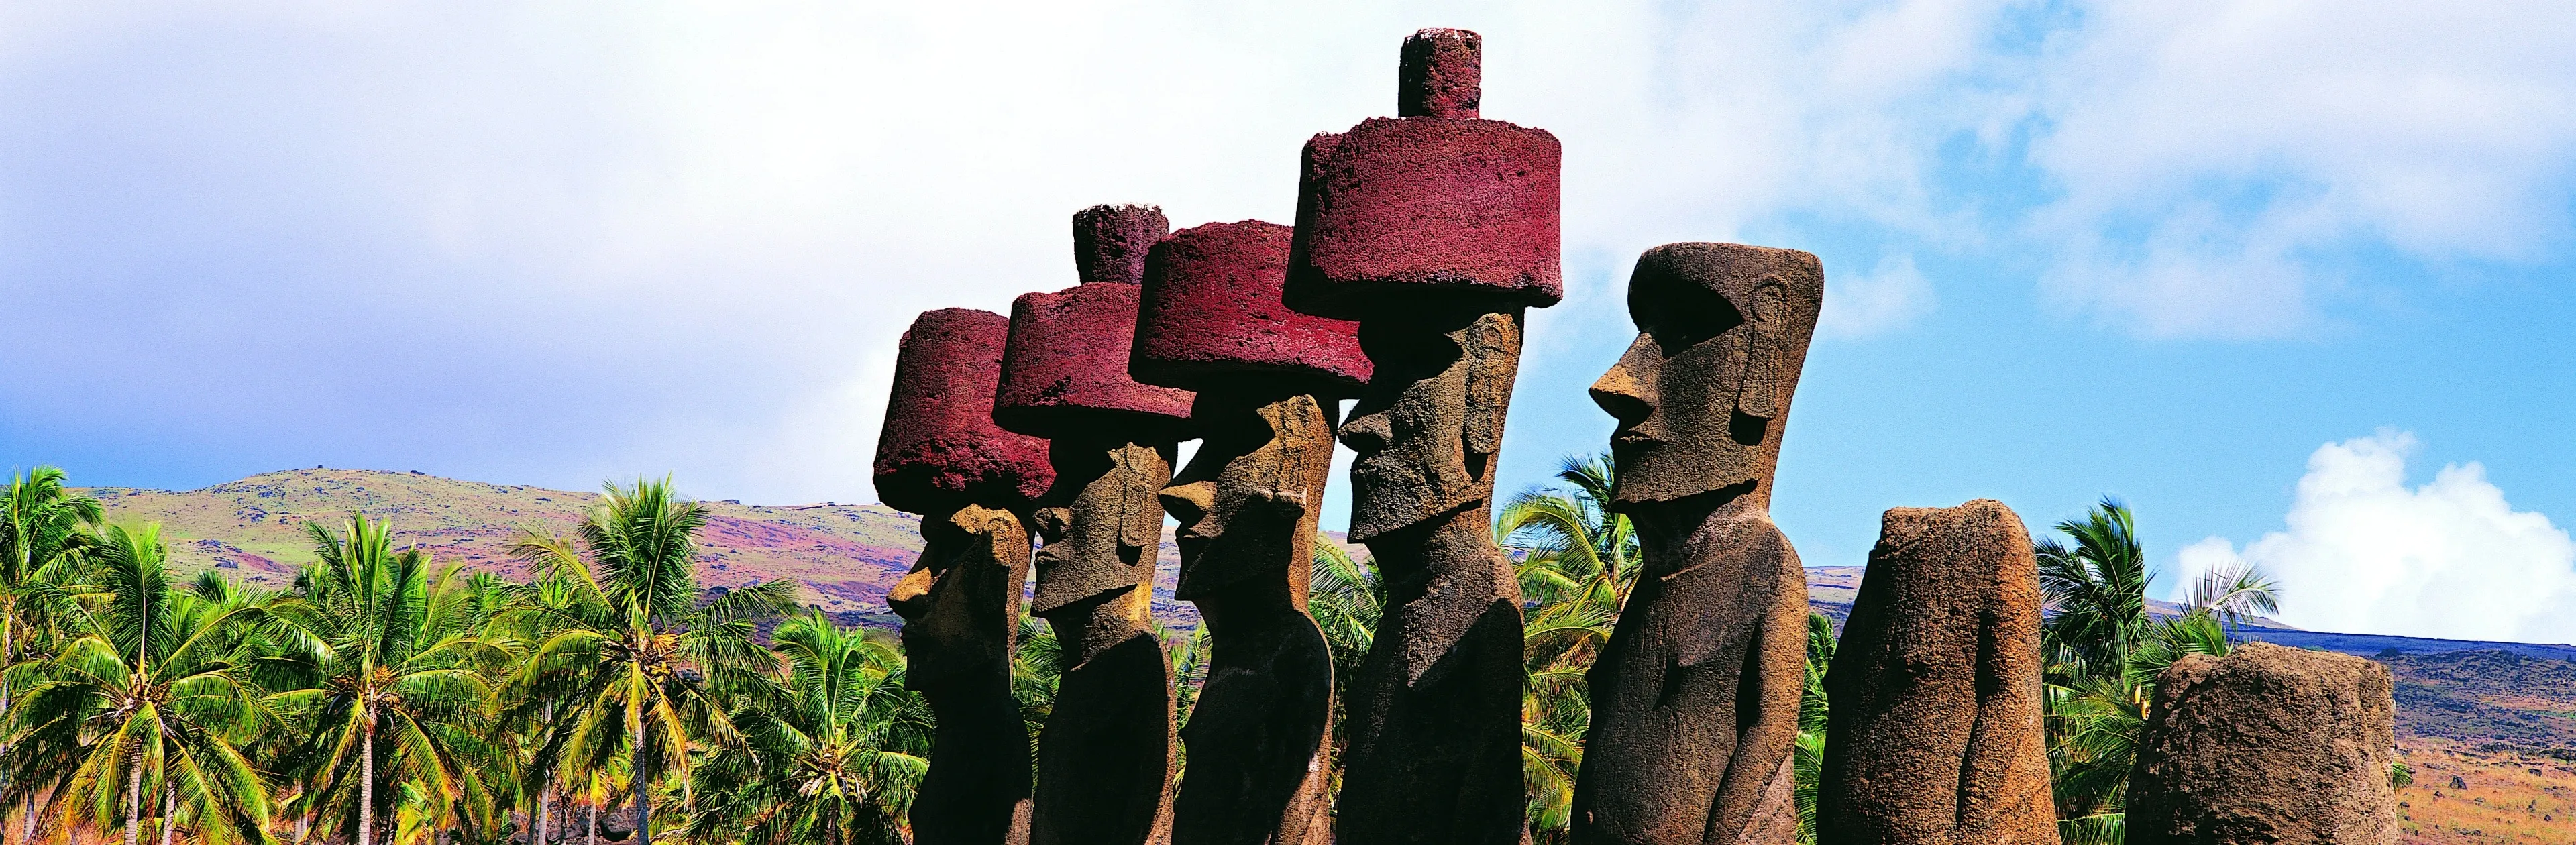 Rapa Nui National Park in Chile, South America | Nature Reserves - Rated 4